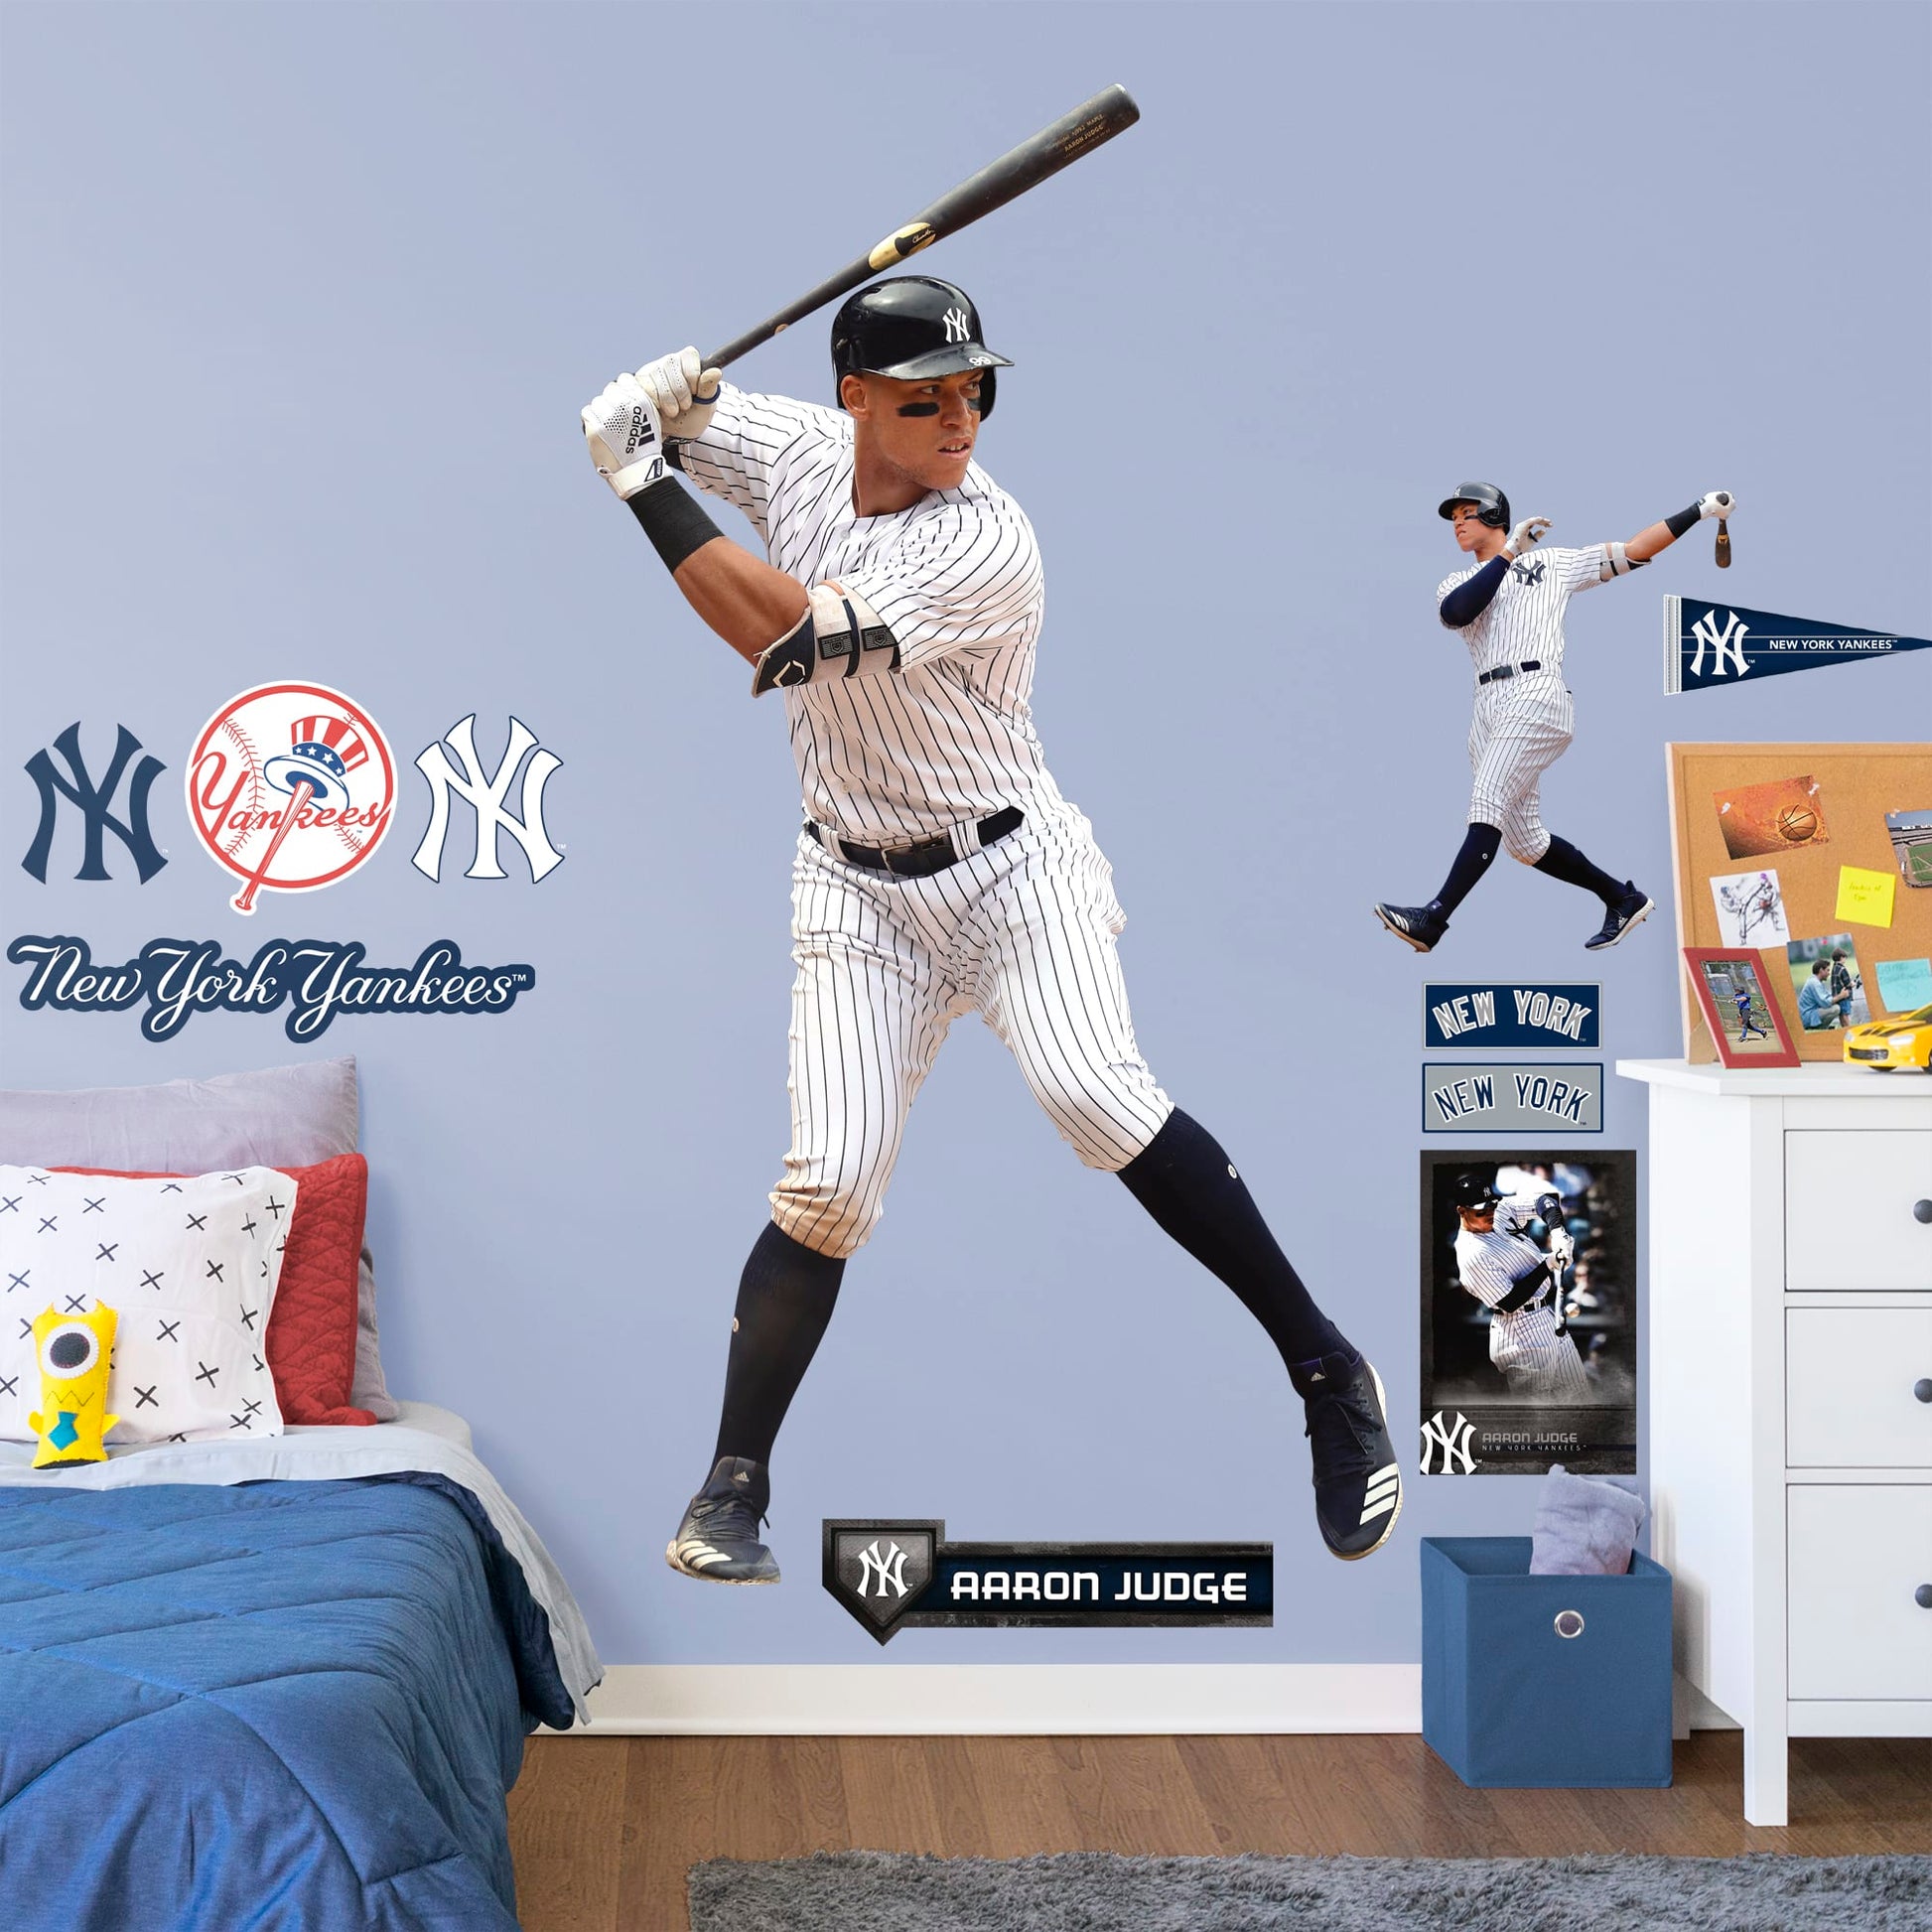 X-Large Athlete + 2 Decals (21"W x 39"H) Feed your inner sports fanatic with this unique Aaron Judge wall decal. Perfect for unseasoned Yanks or lifelong season-ticket holders, the reusable image of the 2017 Rookie of the Year pick can be moved from room to room with ease. The verdict is in: this adhesive graphic is perfect die-hard fans of The Judge.